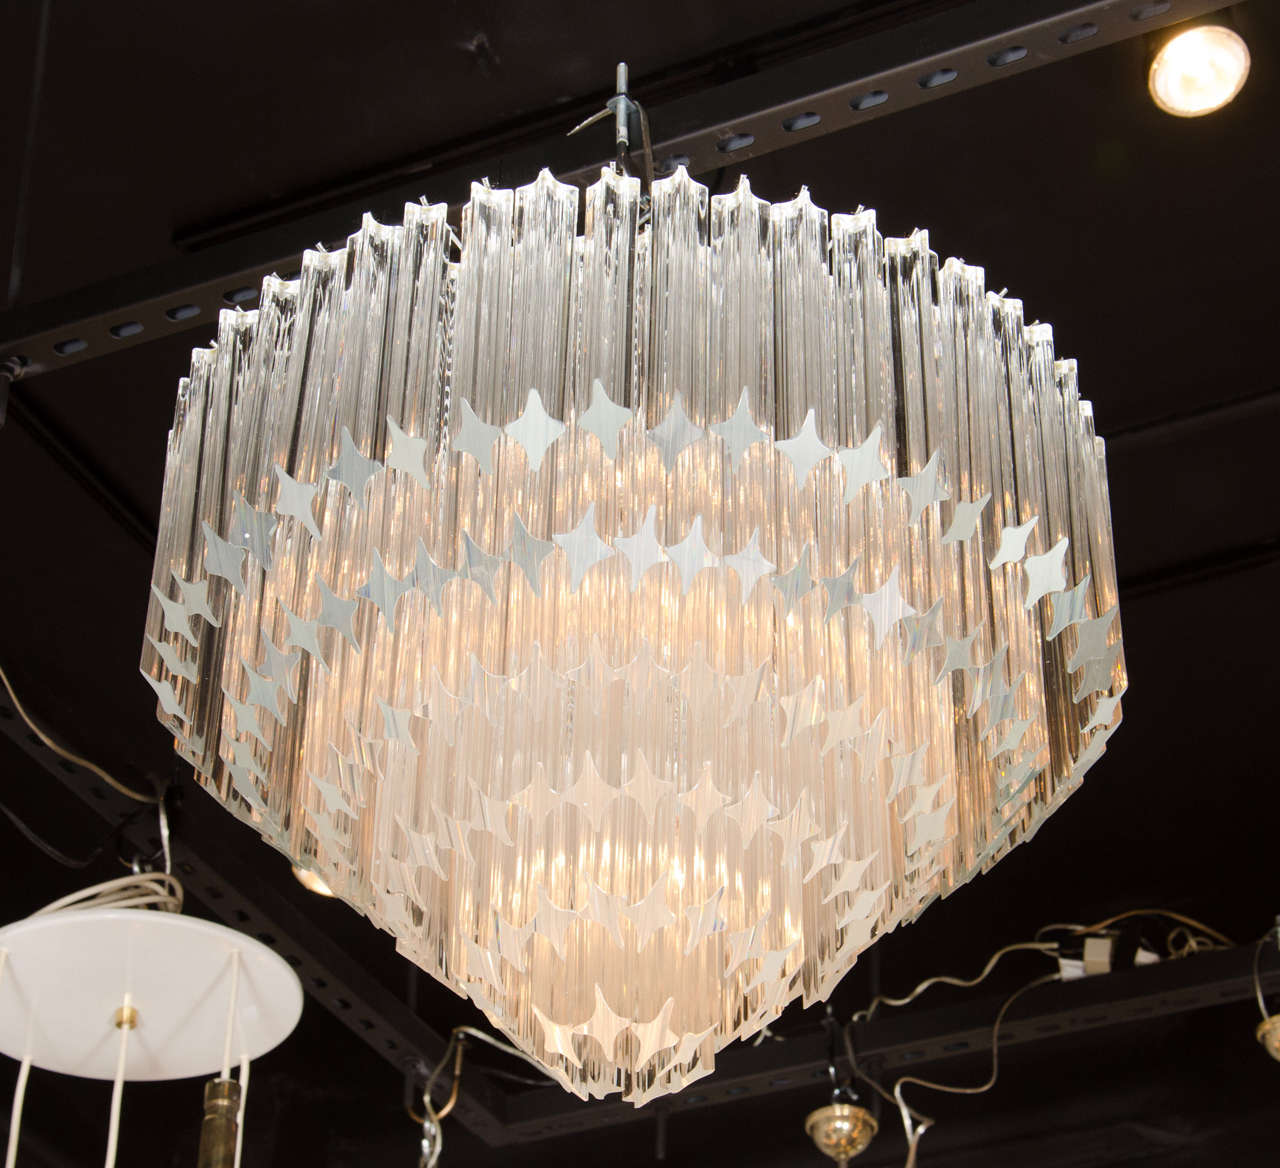 This exceptional Mid-Century Modernist Camer chandelier by Venini features individually handmade Murano glass triedre prisms hung in six tiers that have been cut at an angle and individually hung from its chrome frame. Each of the six tiers of